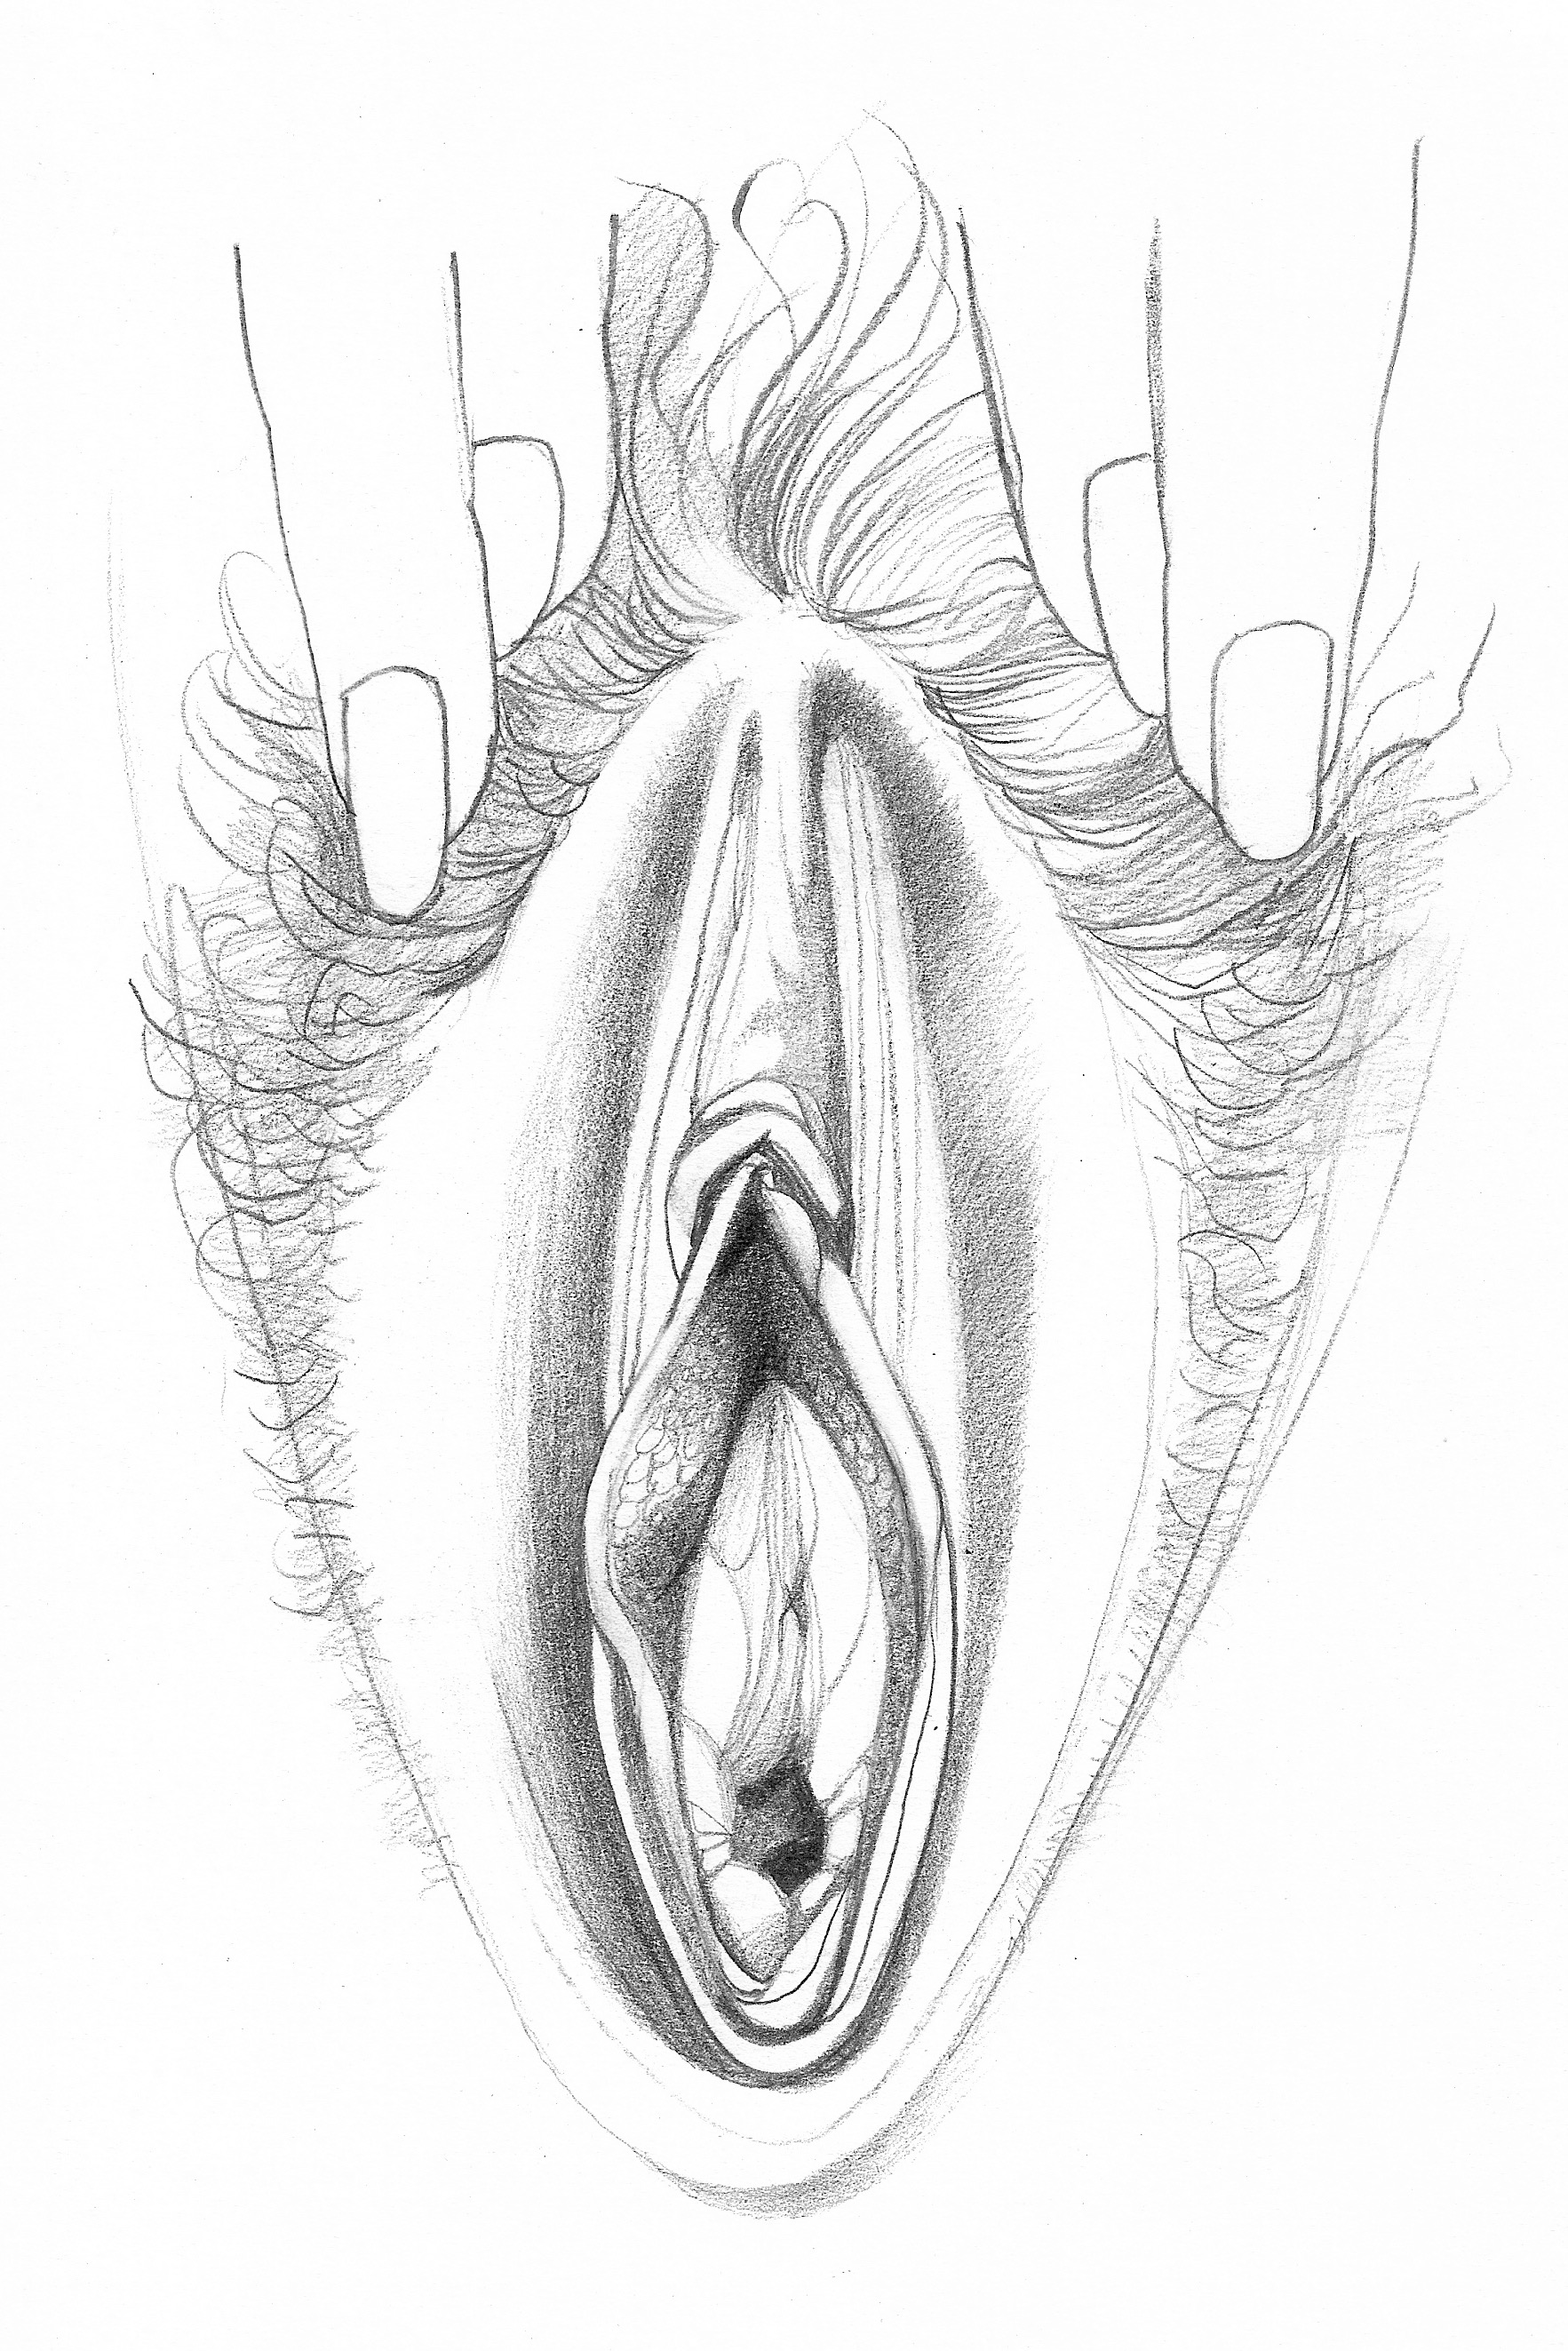 The vagina is perpendicular to the spine and other misconceptions of female...